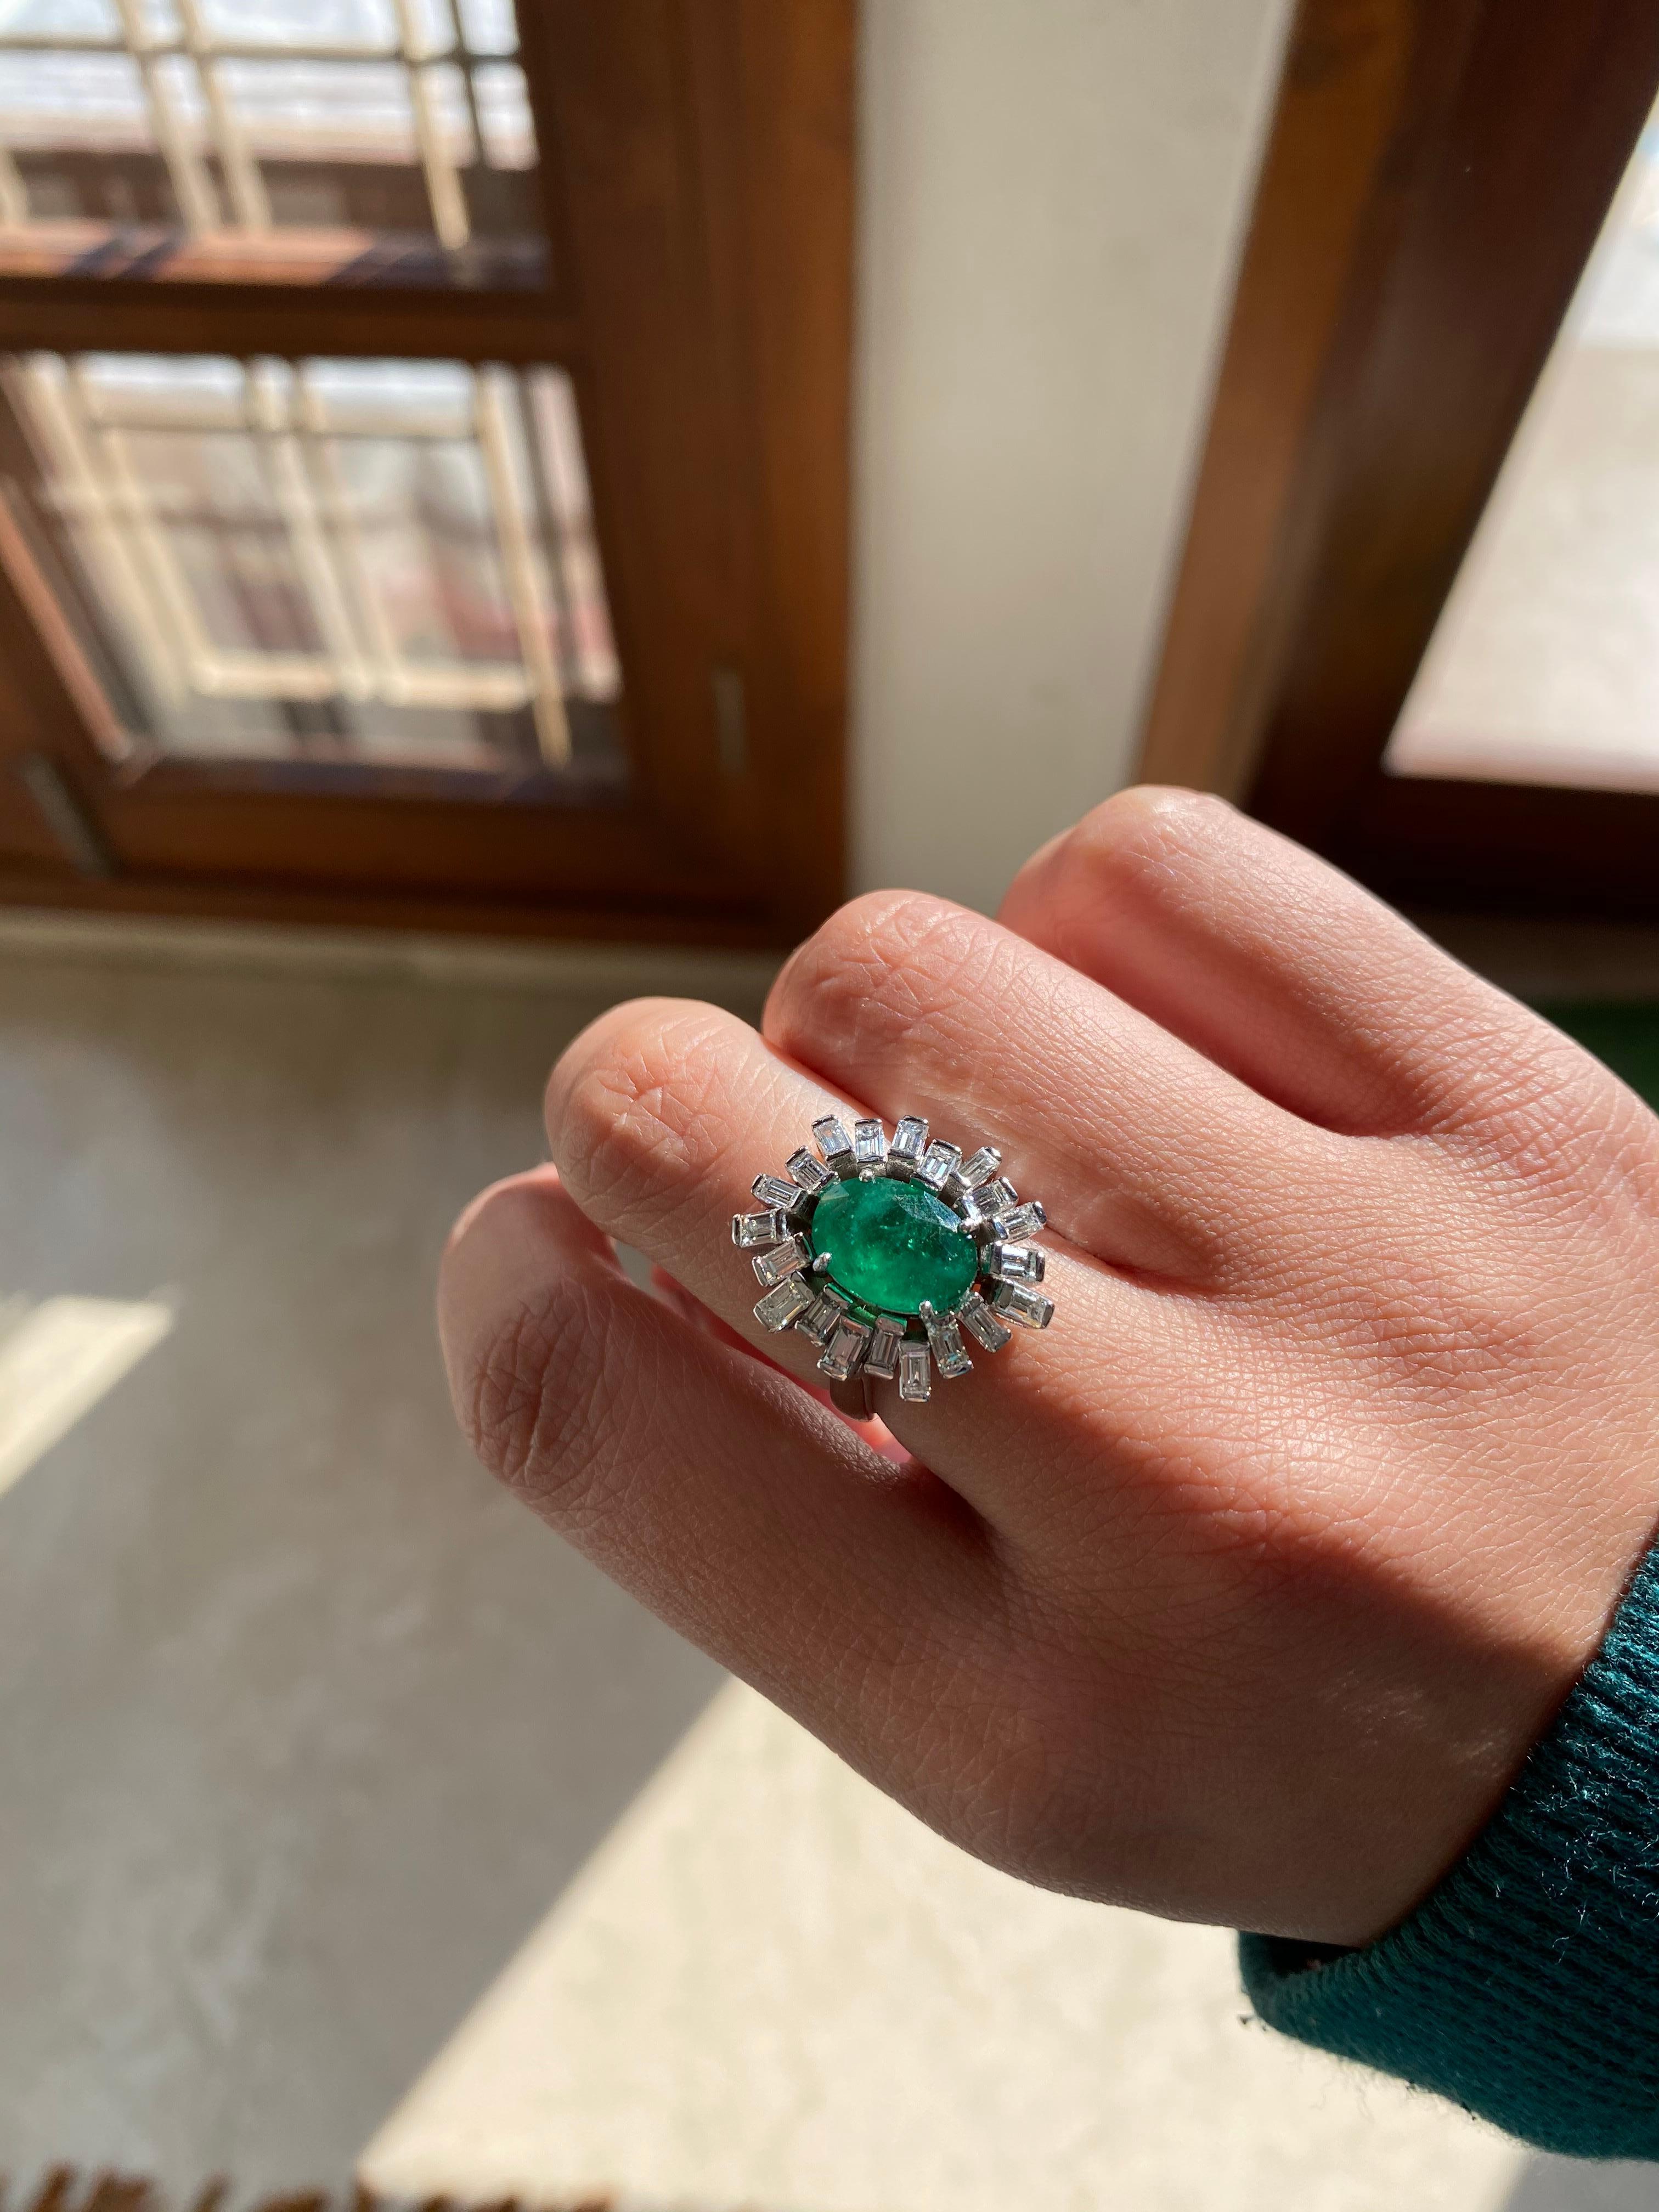 A beautiful and chic emerald and diamond ring set in 18k white gold . The natural emerald weight is 2.54 carats , diamond weight is 1.52 carats , net gold weight is 7.865 grams. The ring dimensions in cm 1.5 x 1.2 x 2.1 (LXWXH). US size 6.